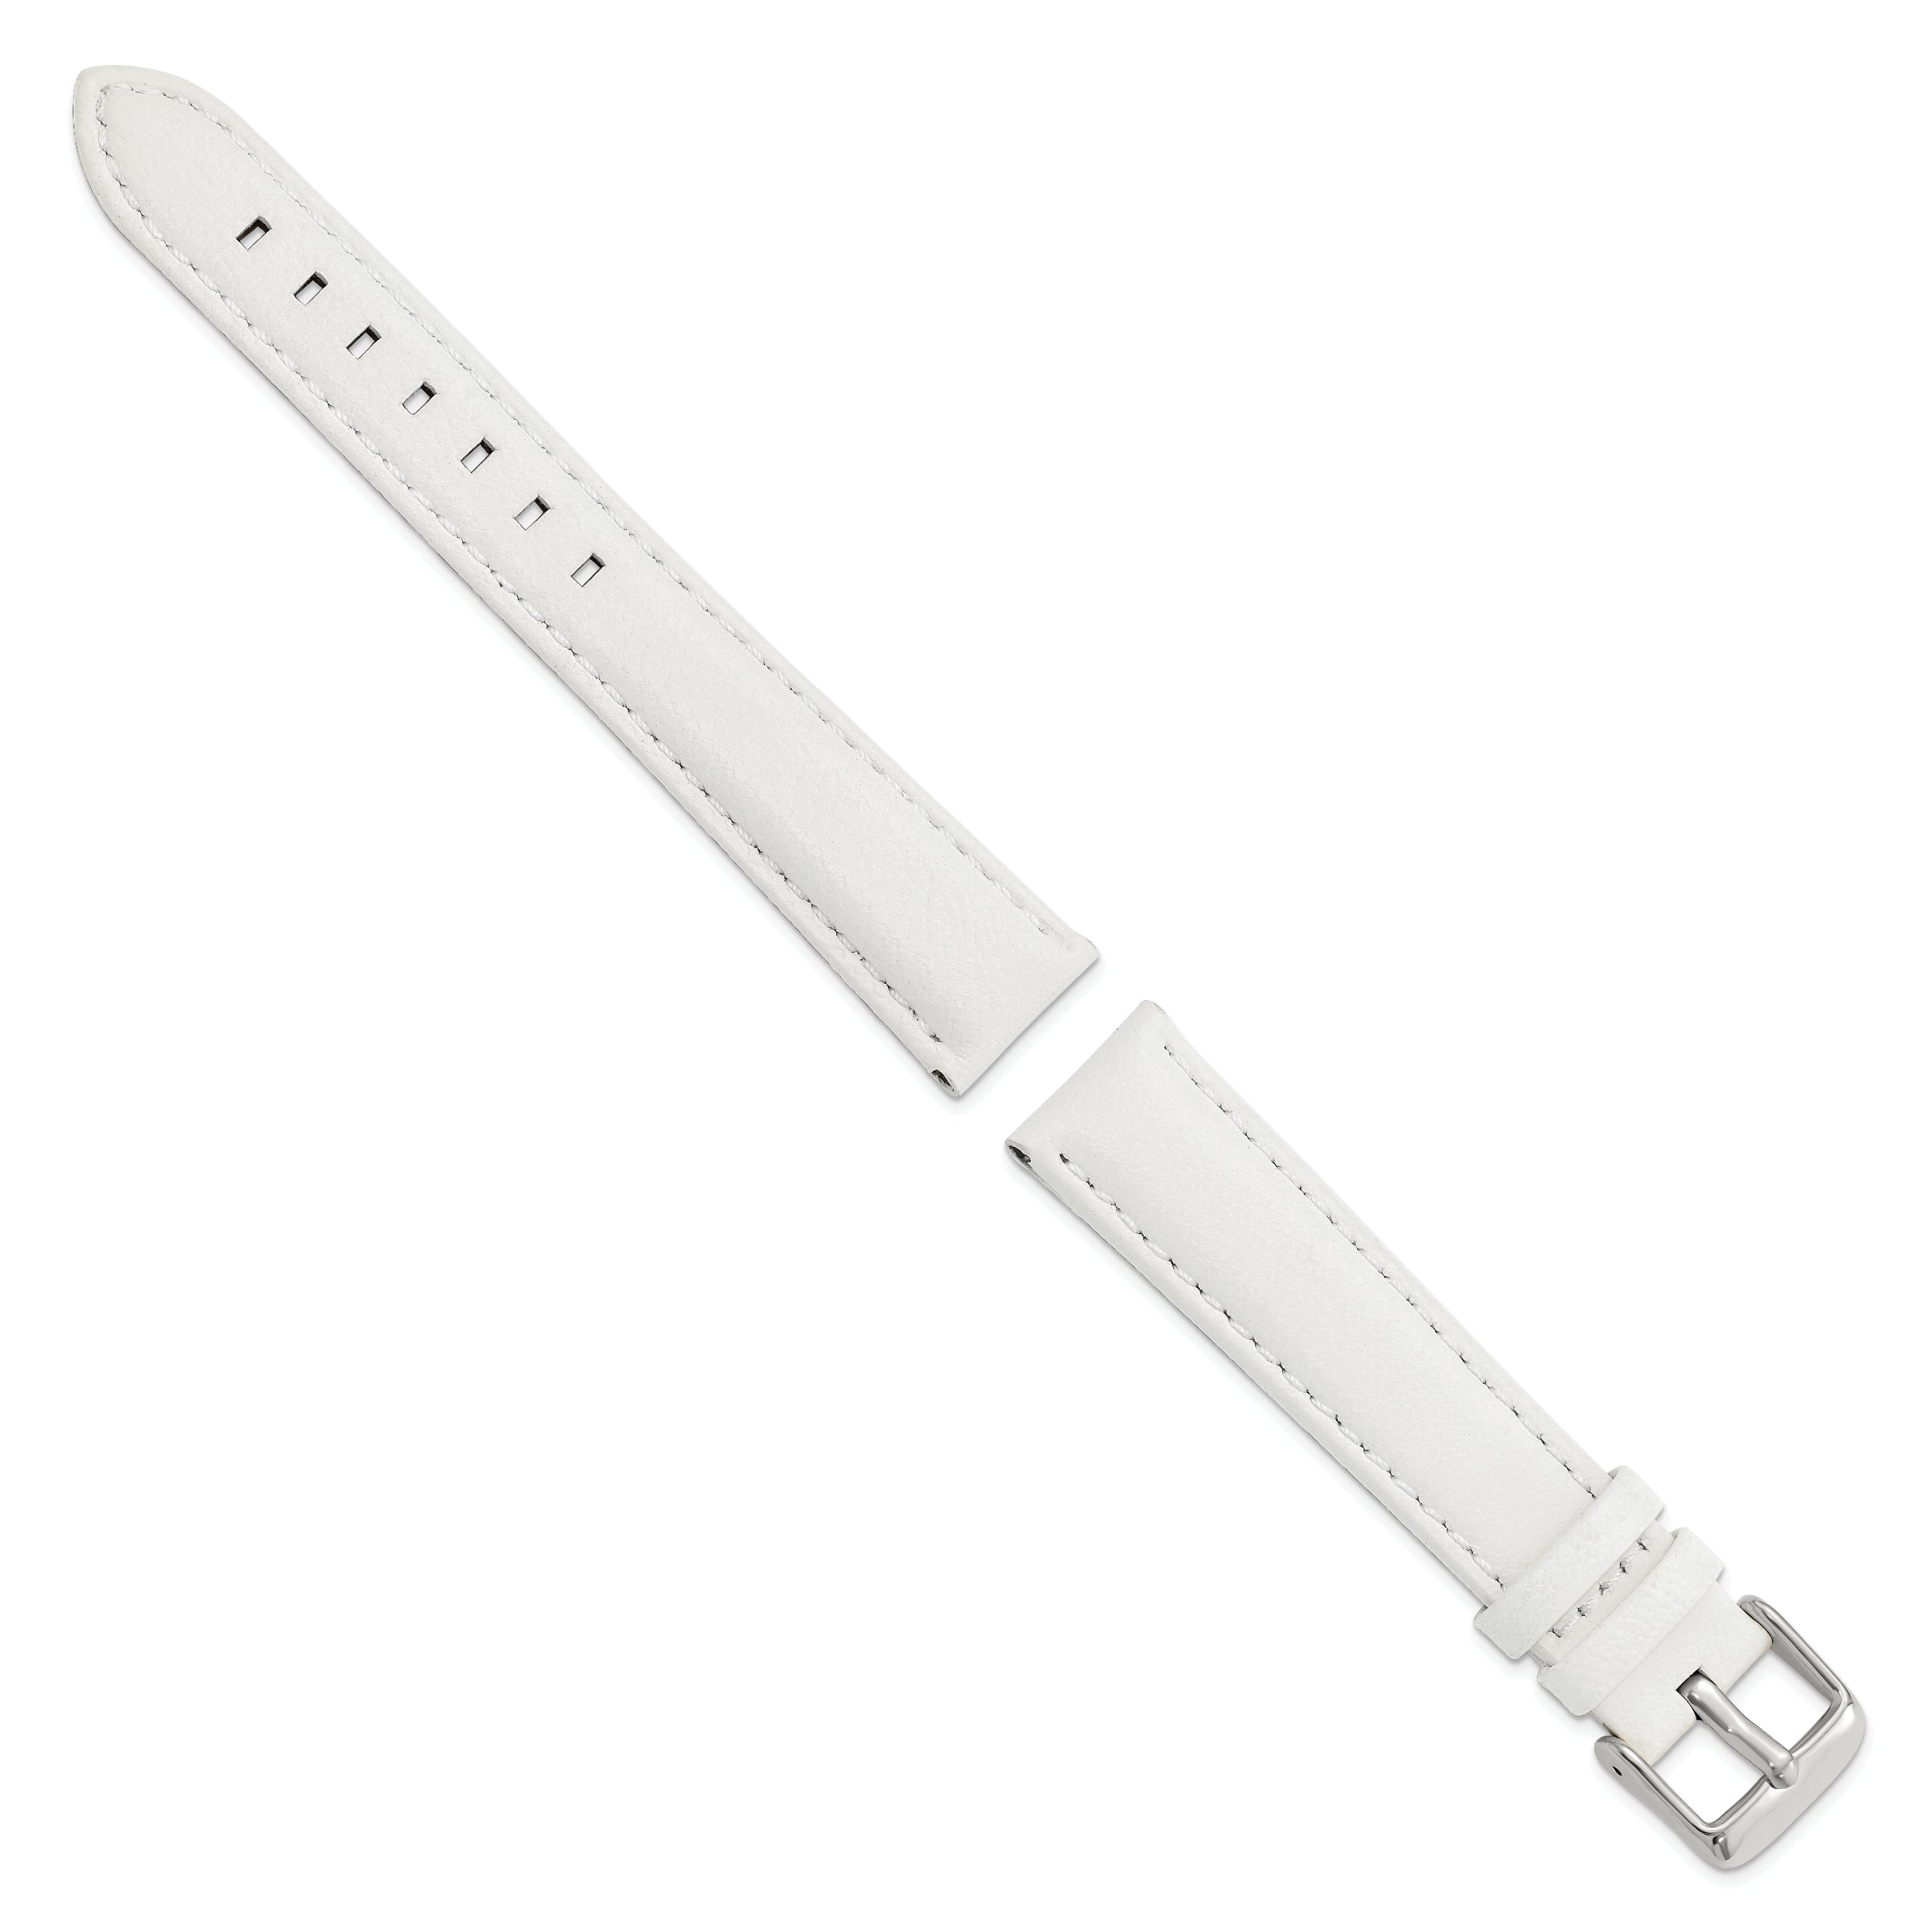 14mm White Glove Leather with Silver-tone Panerai Style Buckle 6.75 inch Watch Band